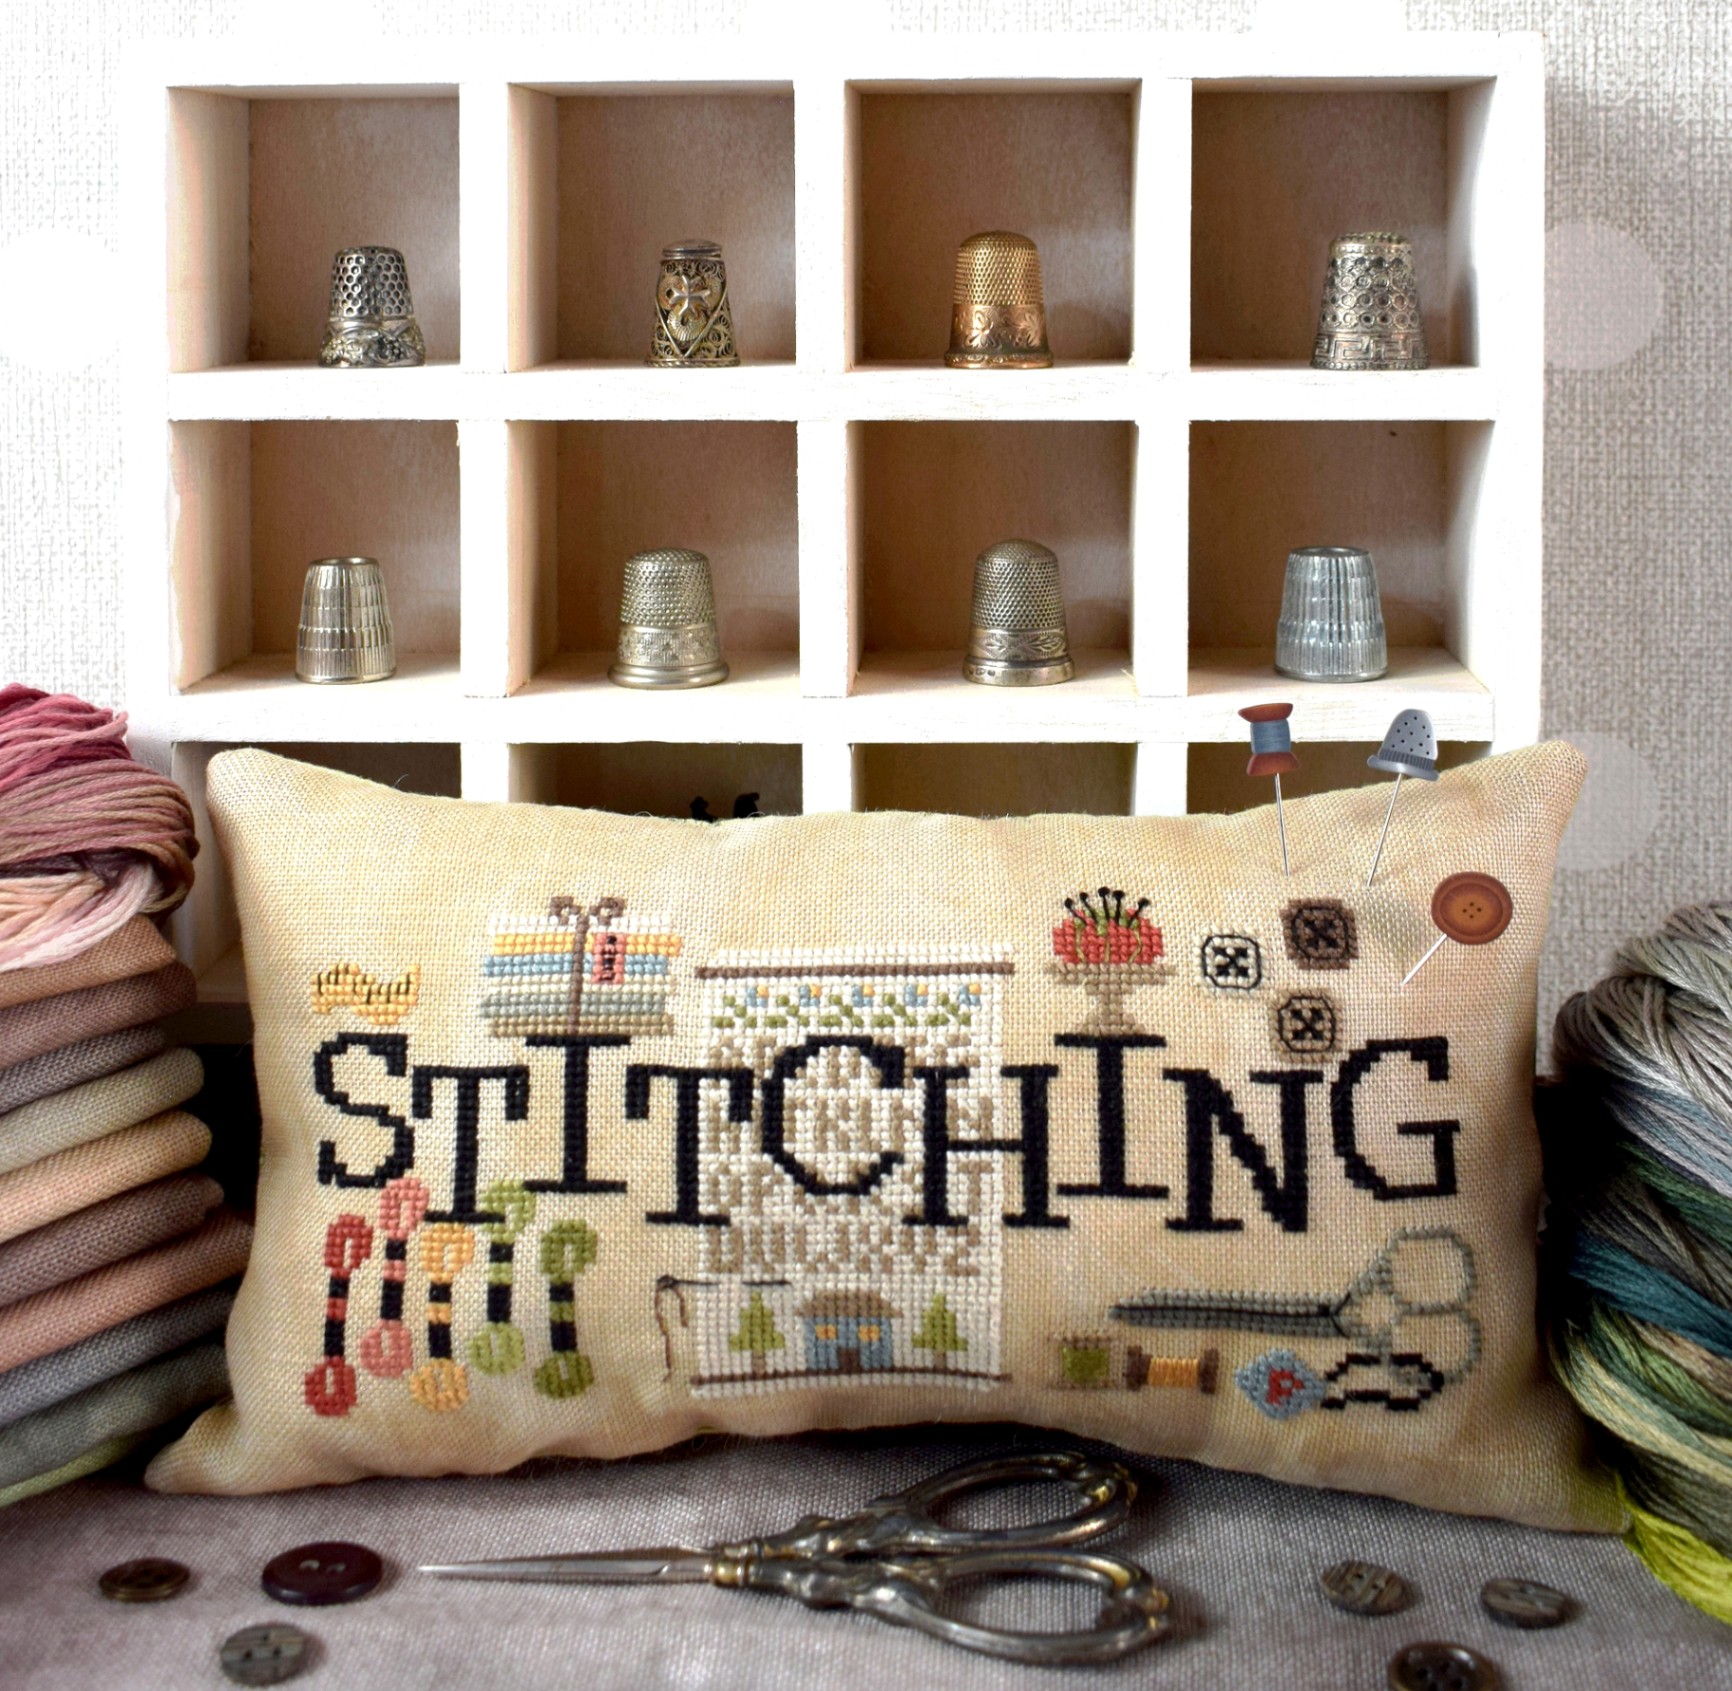 When I Think of Stitching by Puntini Puntini 